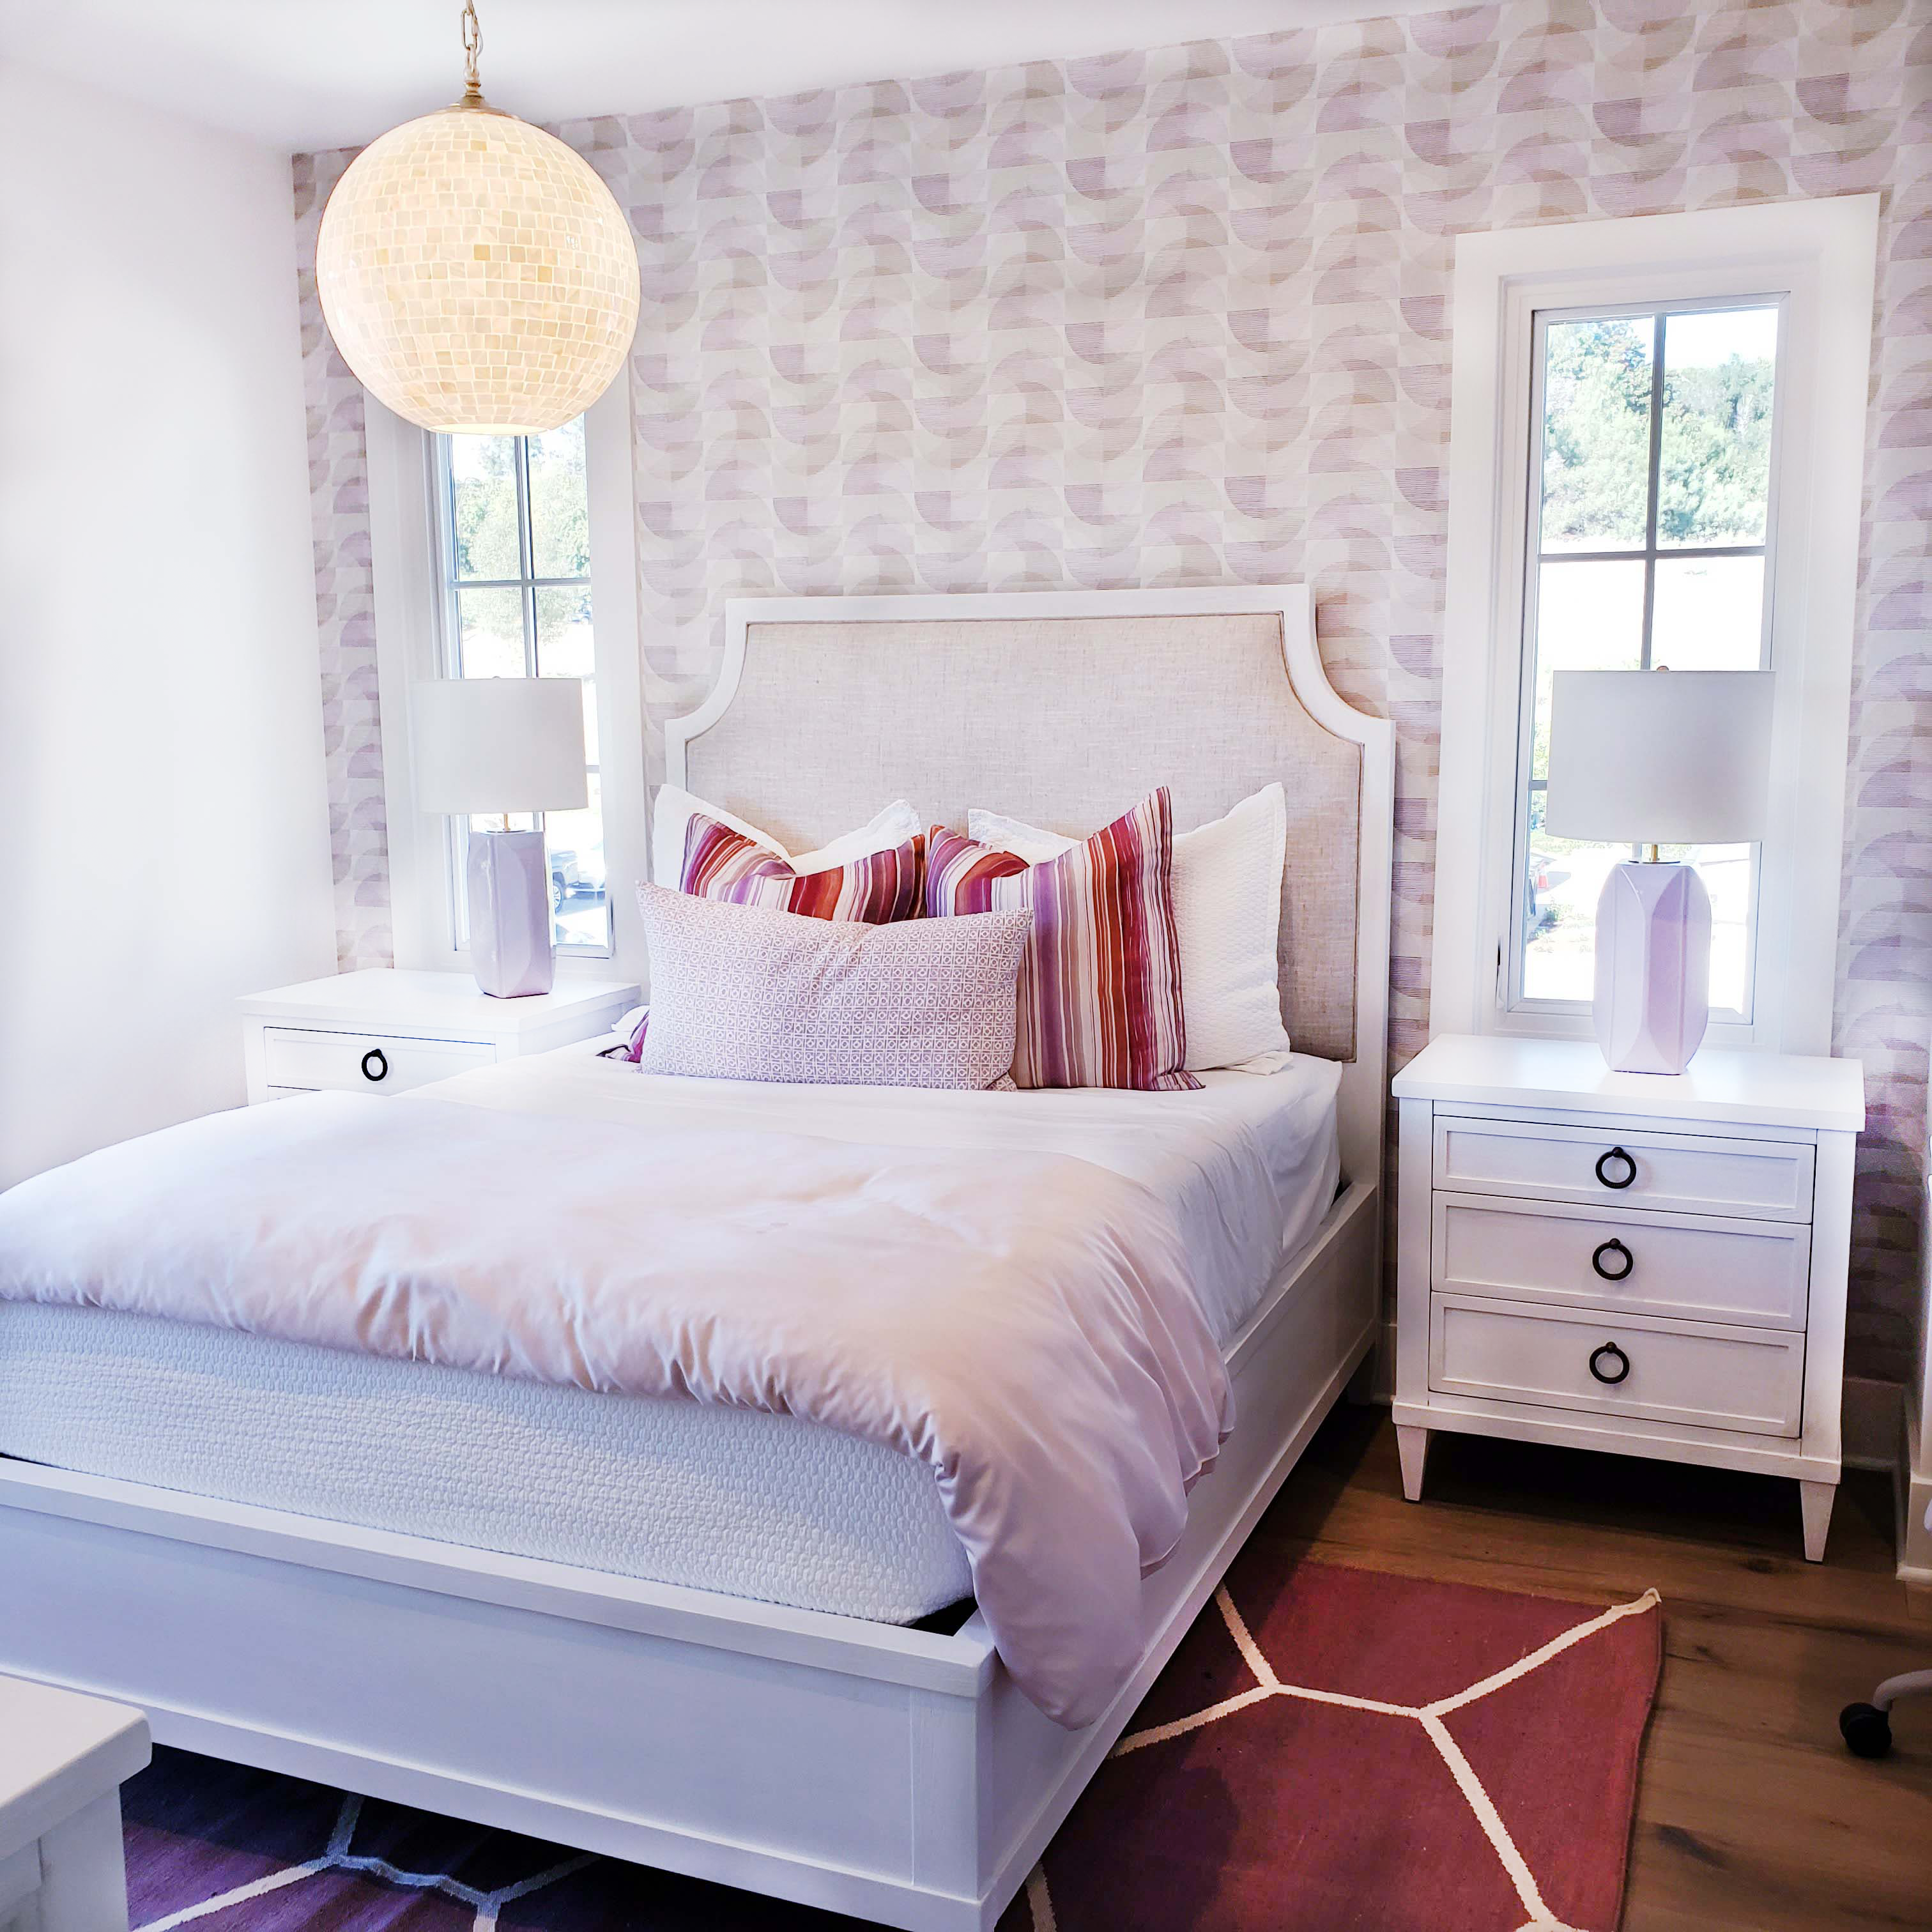 A bedroom, fresh from spring cleaning, with a white bed and pink wallpaper.